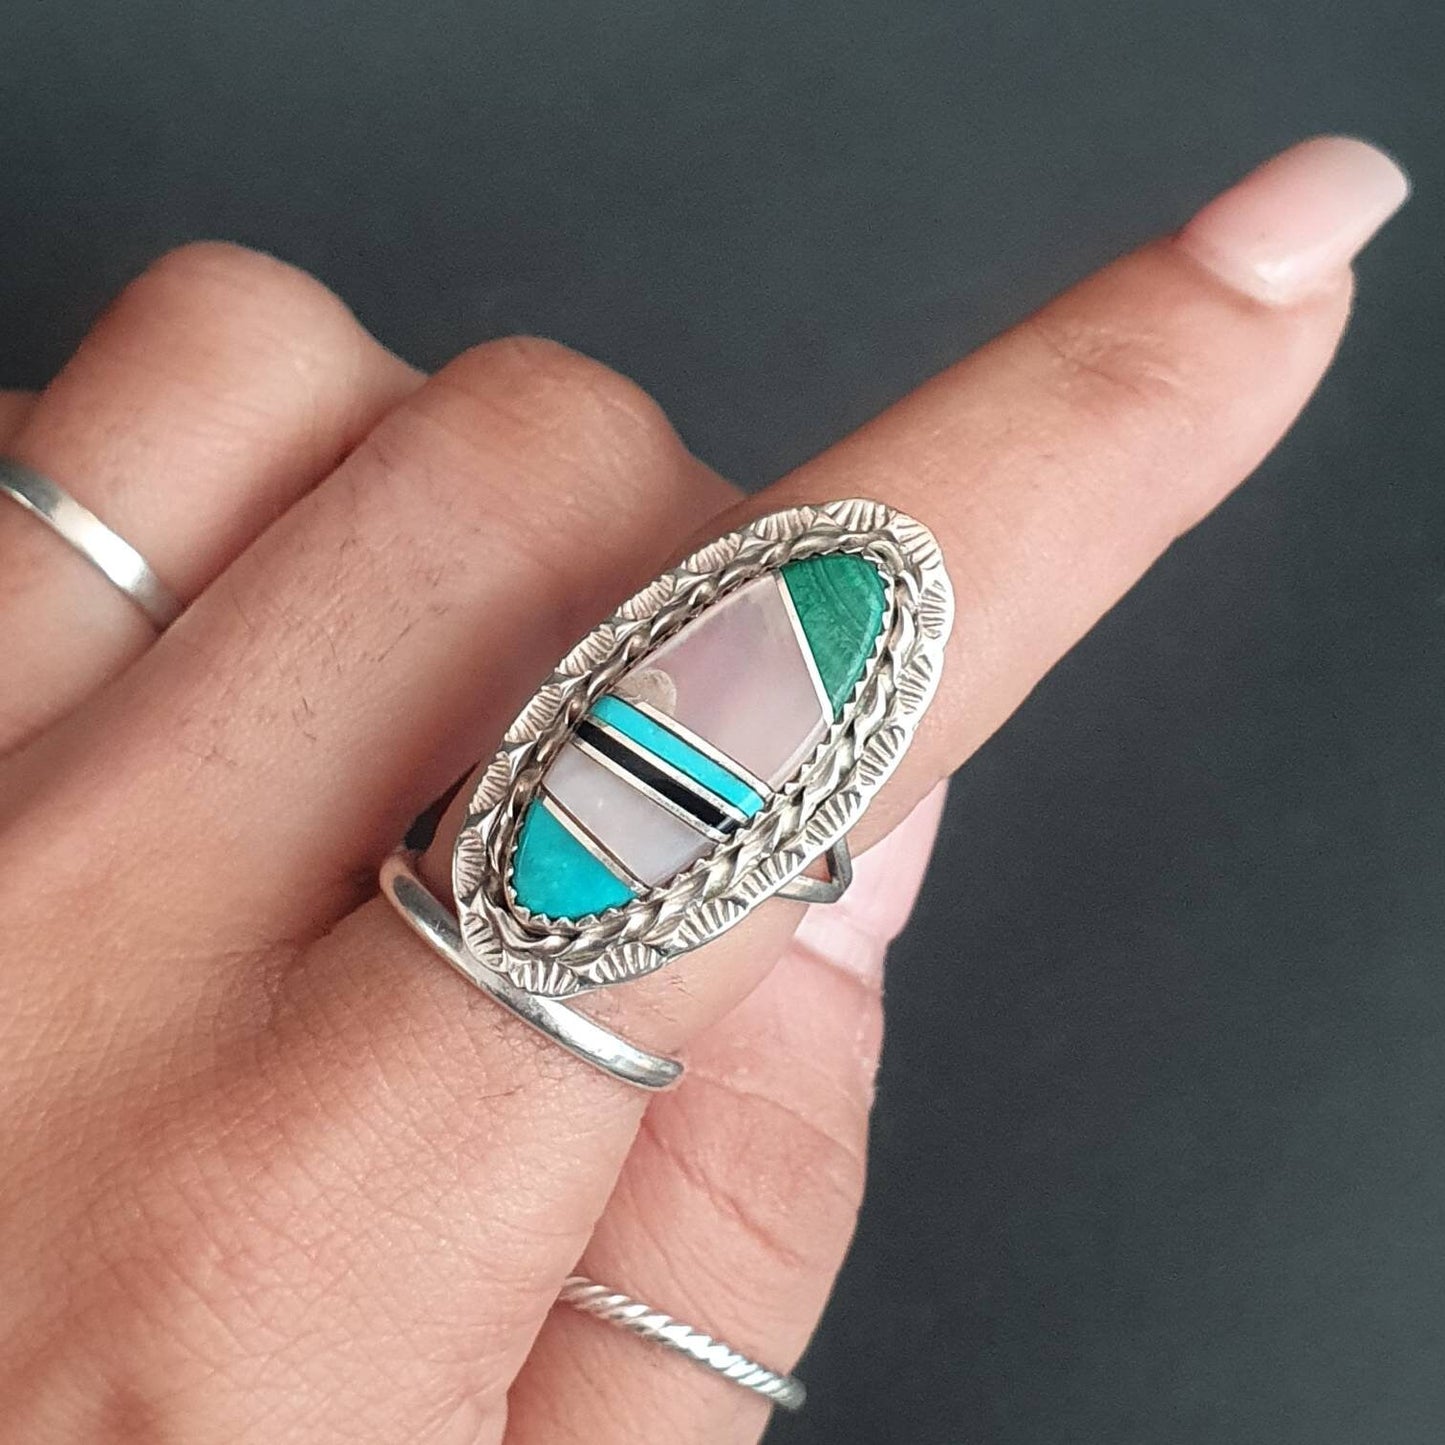 Multi-stone ring, sterling silver ring, silver ring, Navajo ring,Navajo jewellery, statement ring, Turquoise ring, gifts for all,antique